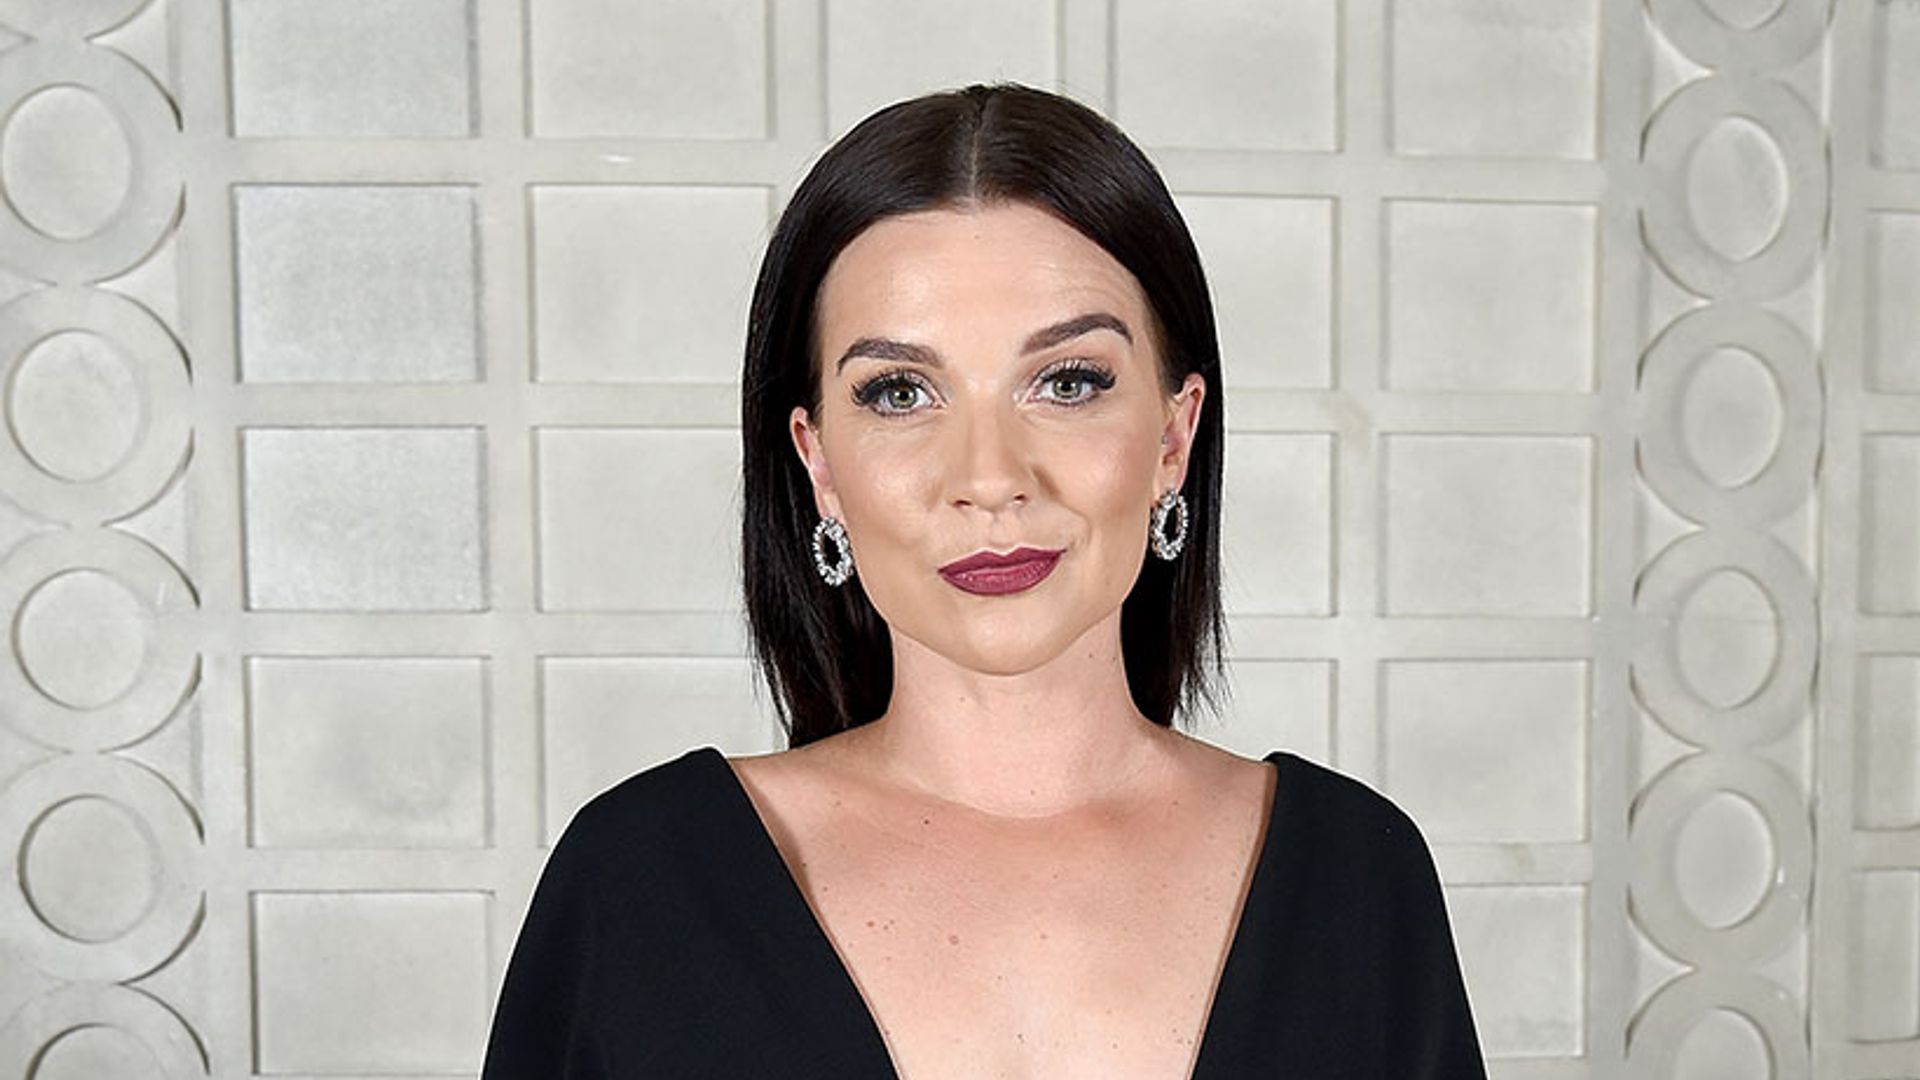 Candice Brown welcomes new family member following wedding